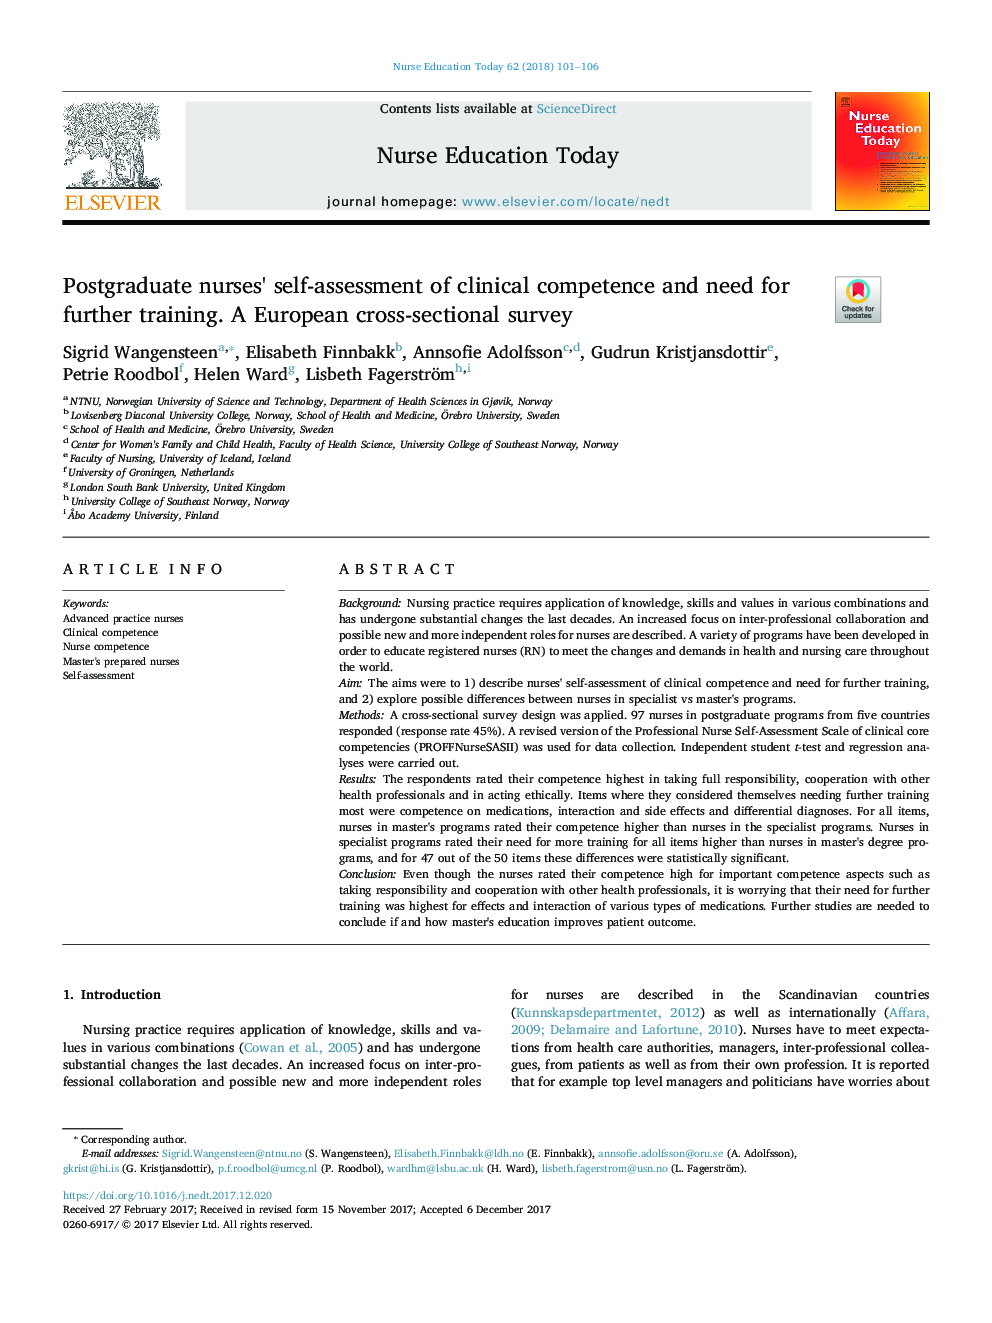 Postgraduate nurses' self-assessment of clinical competence and need for further training. A European cross-sectional survey